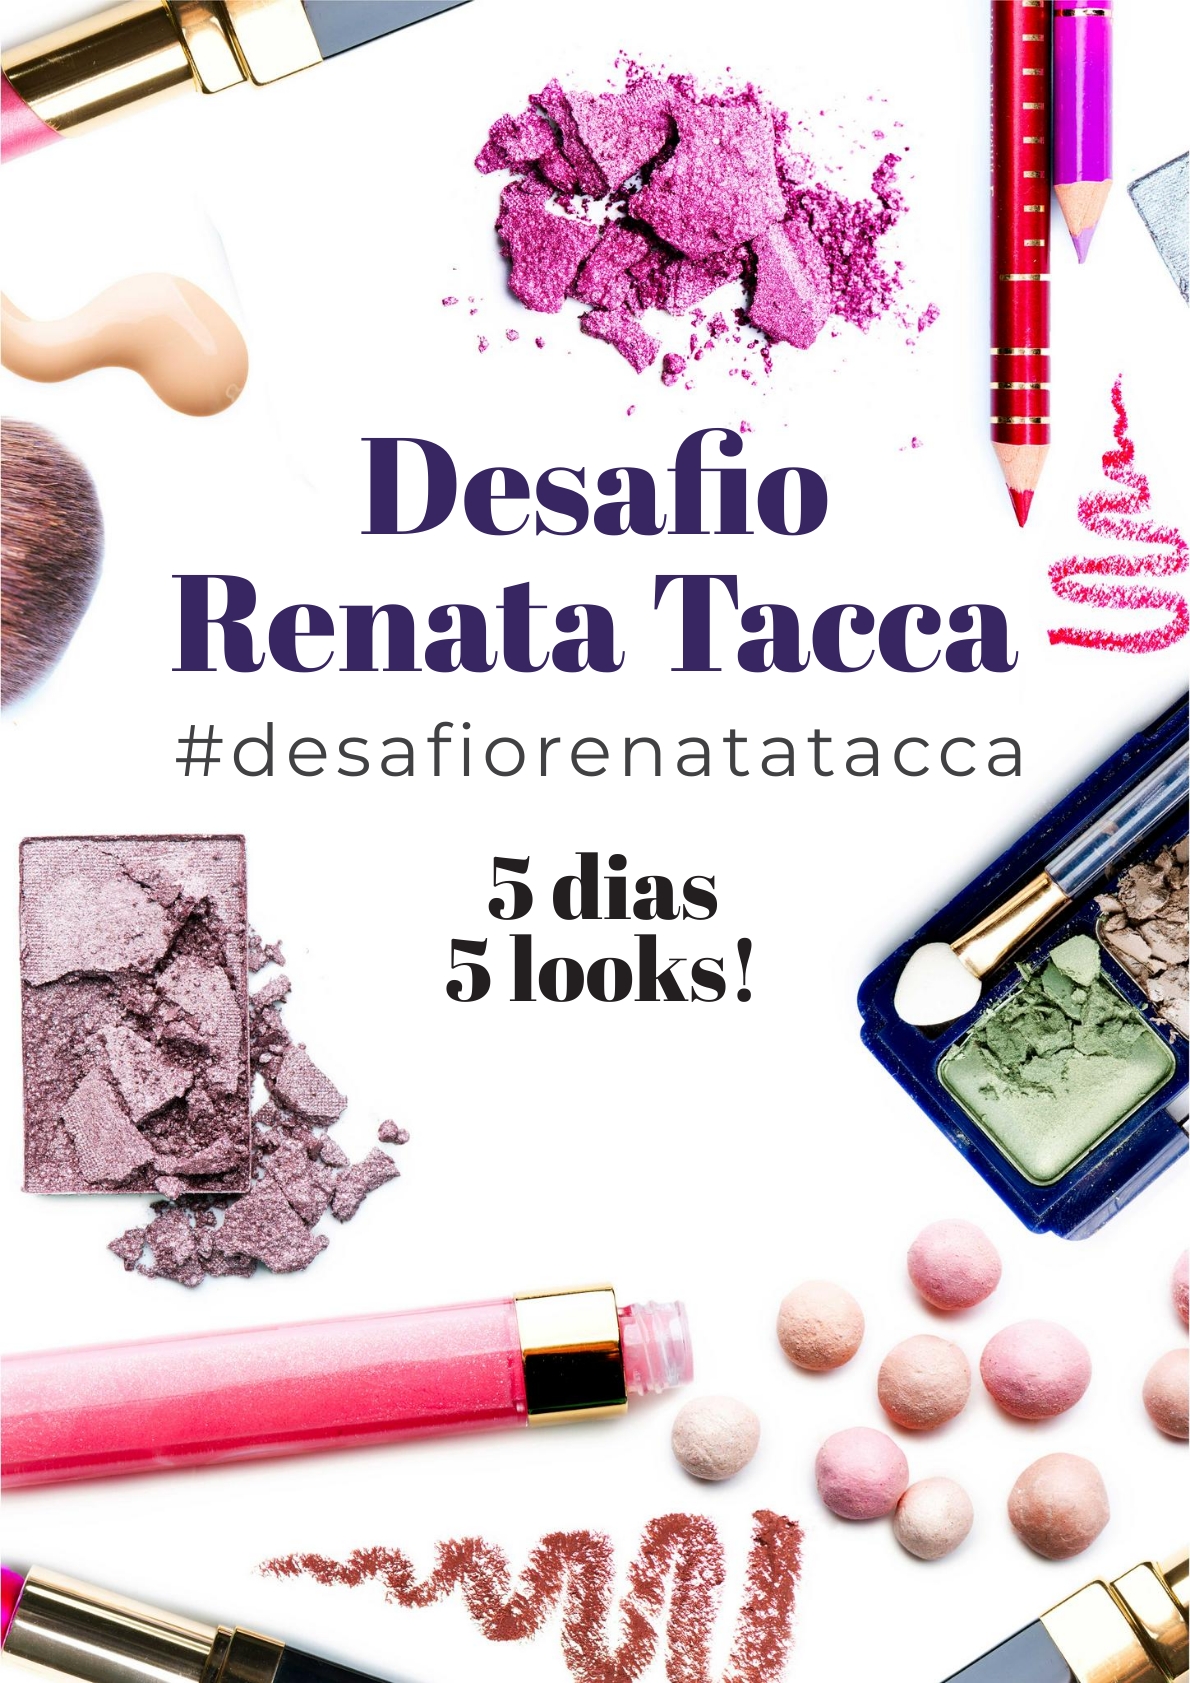 You are currently viewing Desafio Renata Tacca